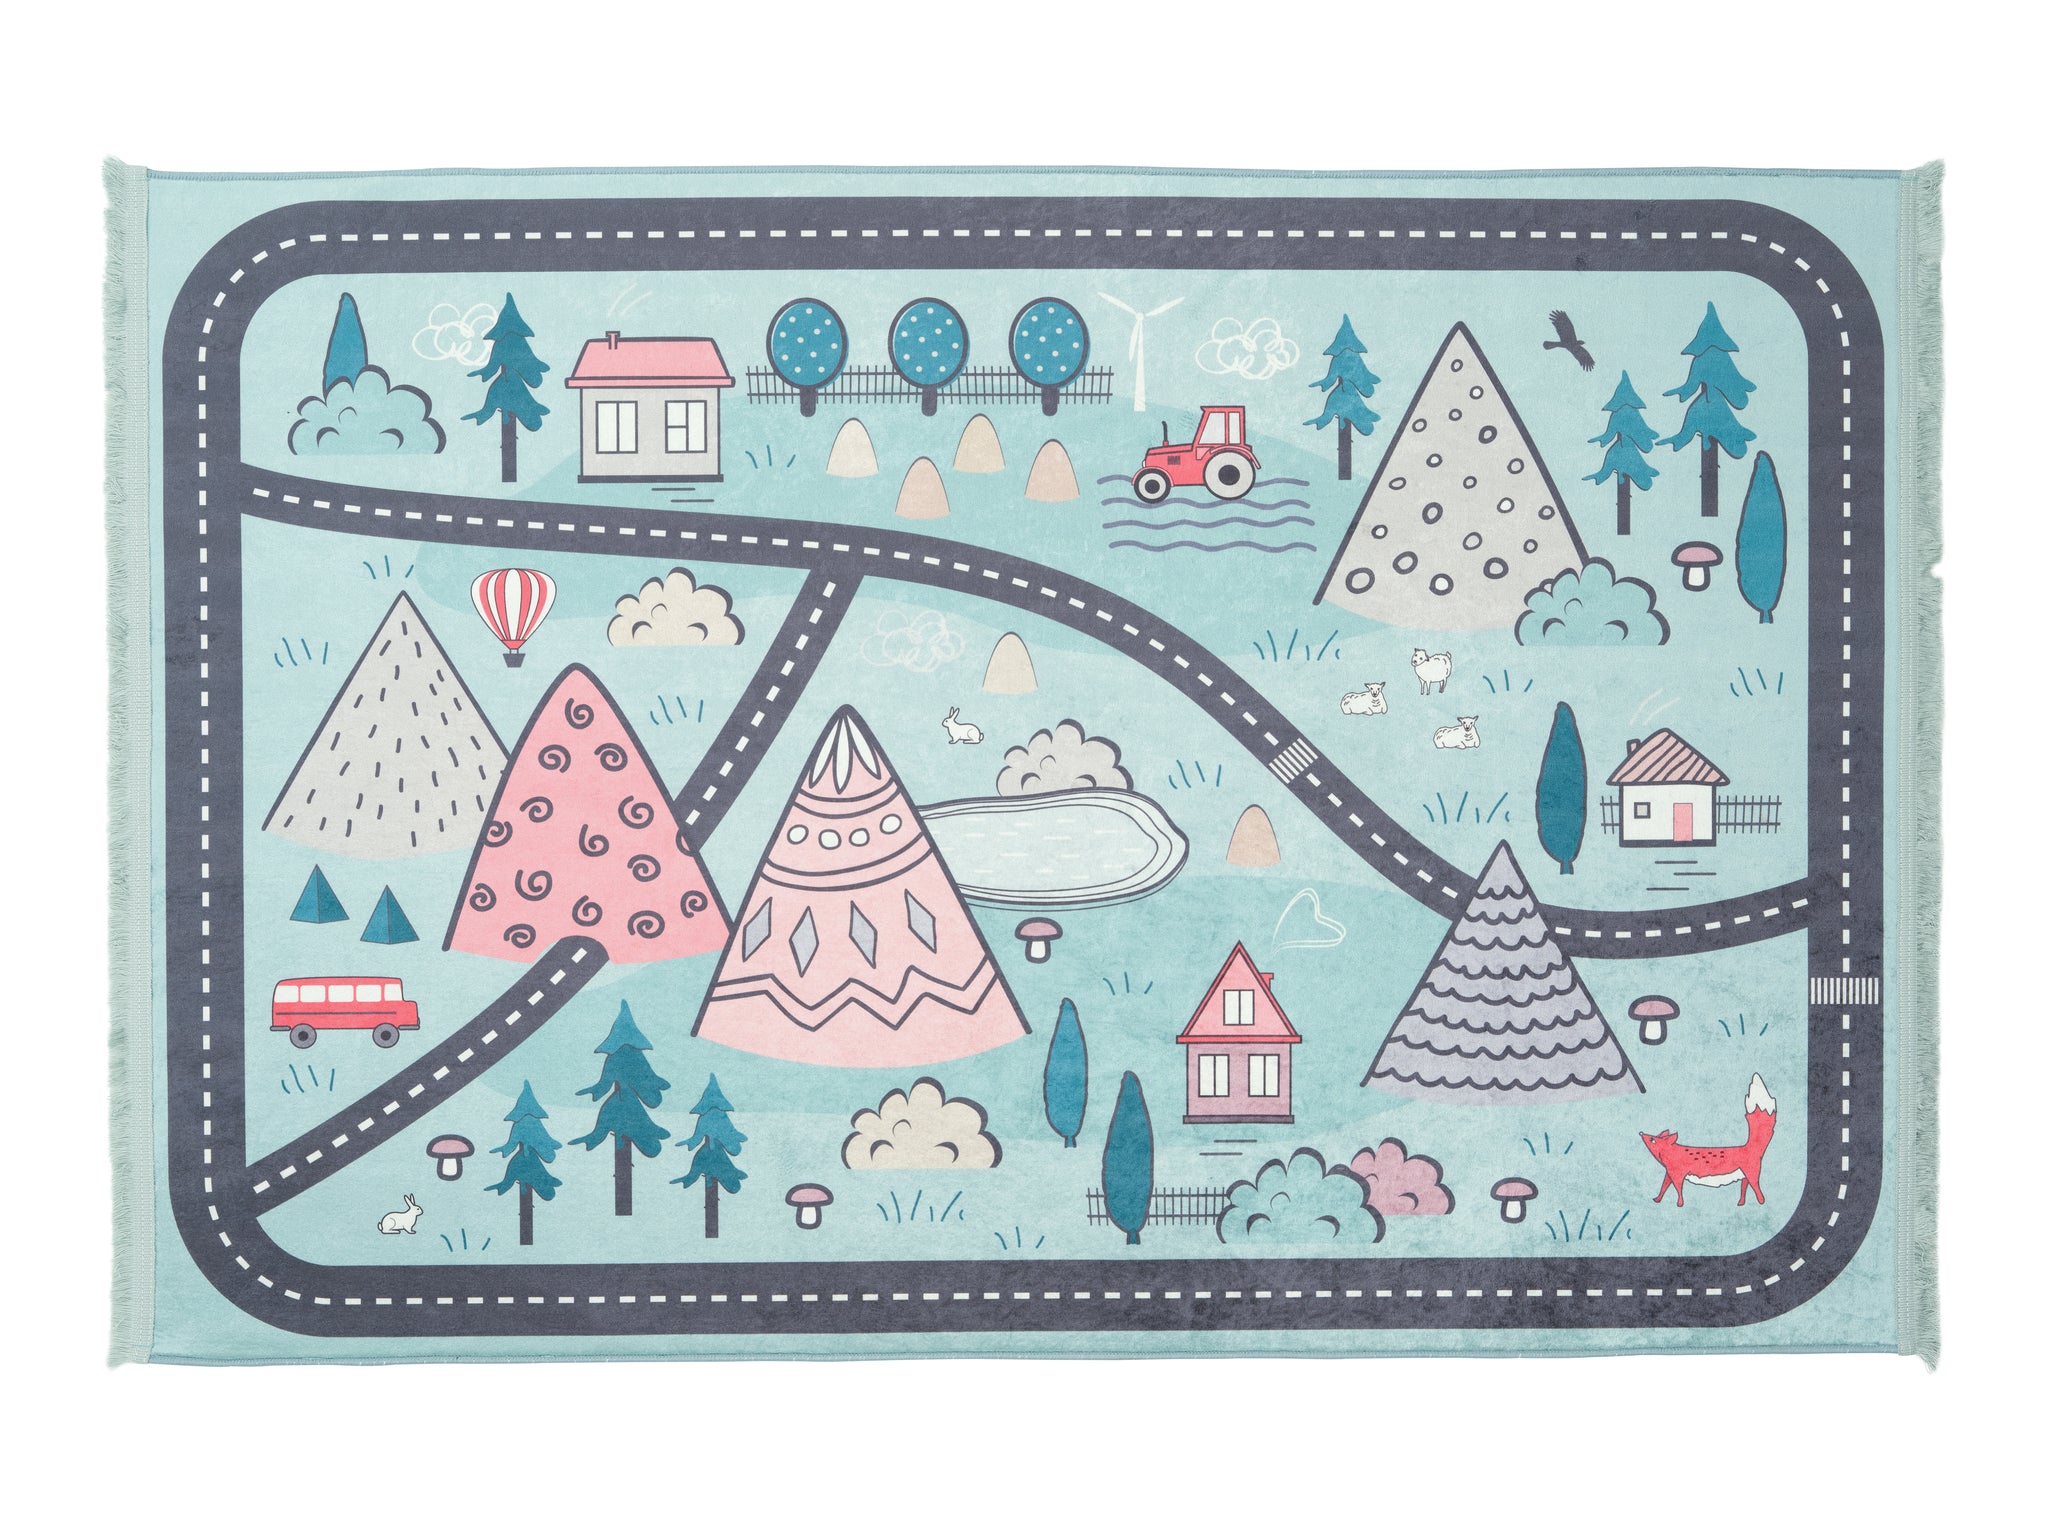 Rugaroos Camping Trails Kid's Machine Washable Play Rug | Trails leading through Mountains and cabins in the woods on Light Green | 4x6 | Mother Ruggers | Washable Rugs | Kid's Rugs | Eco Friendly Rug| Pet Friendly | Kid Friendly | Machine Wash | Line Dry | Bedroom | High-Traffic | Two-year warranty with proper care | Shake or light Vacuum | Machine Wash as needed | Dry Flat or Line Dry | Dries fast | Hand Drawn - Digitally Printed | Velvet | Easy- Clean 